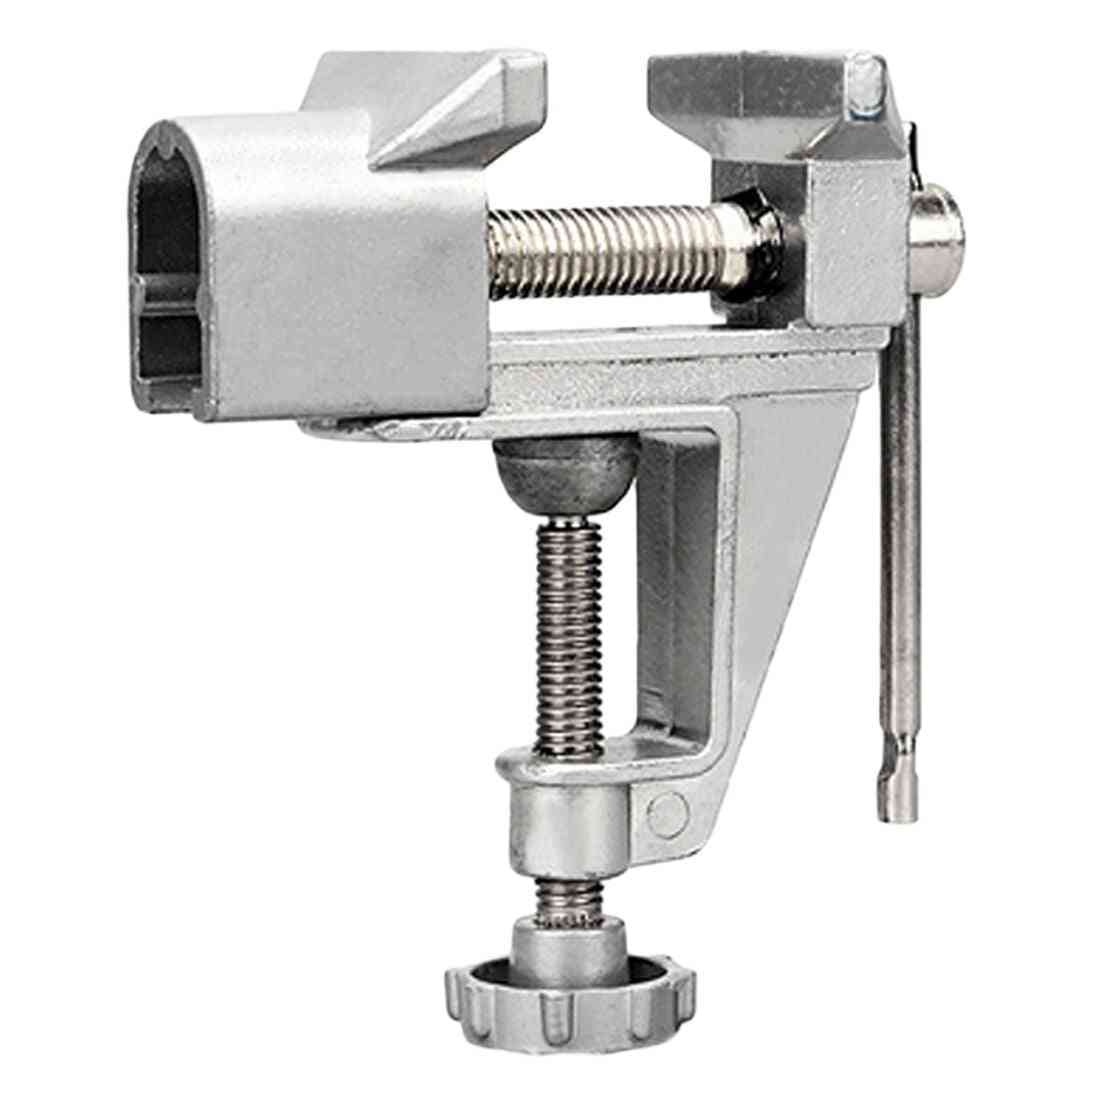 Machine Bench And Screw Vise, Mini Table Clamp For Craft Mould Fixed Repair Tool